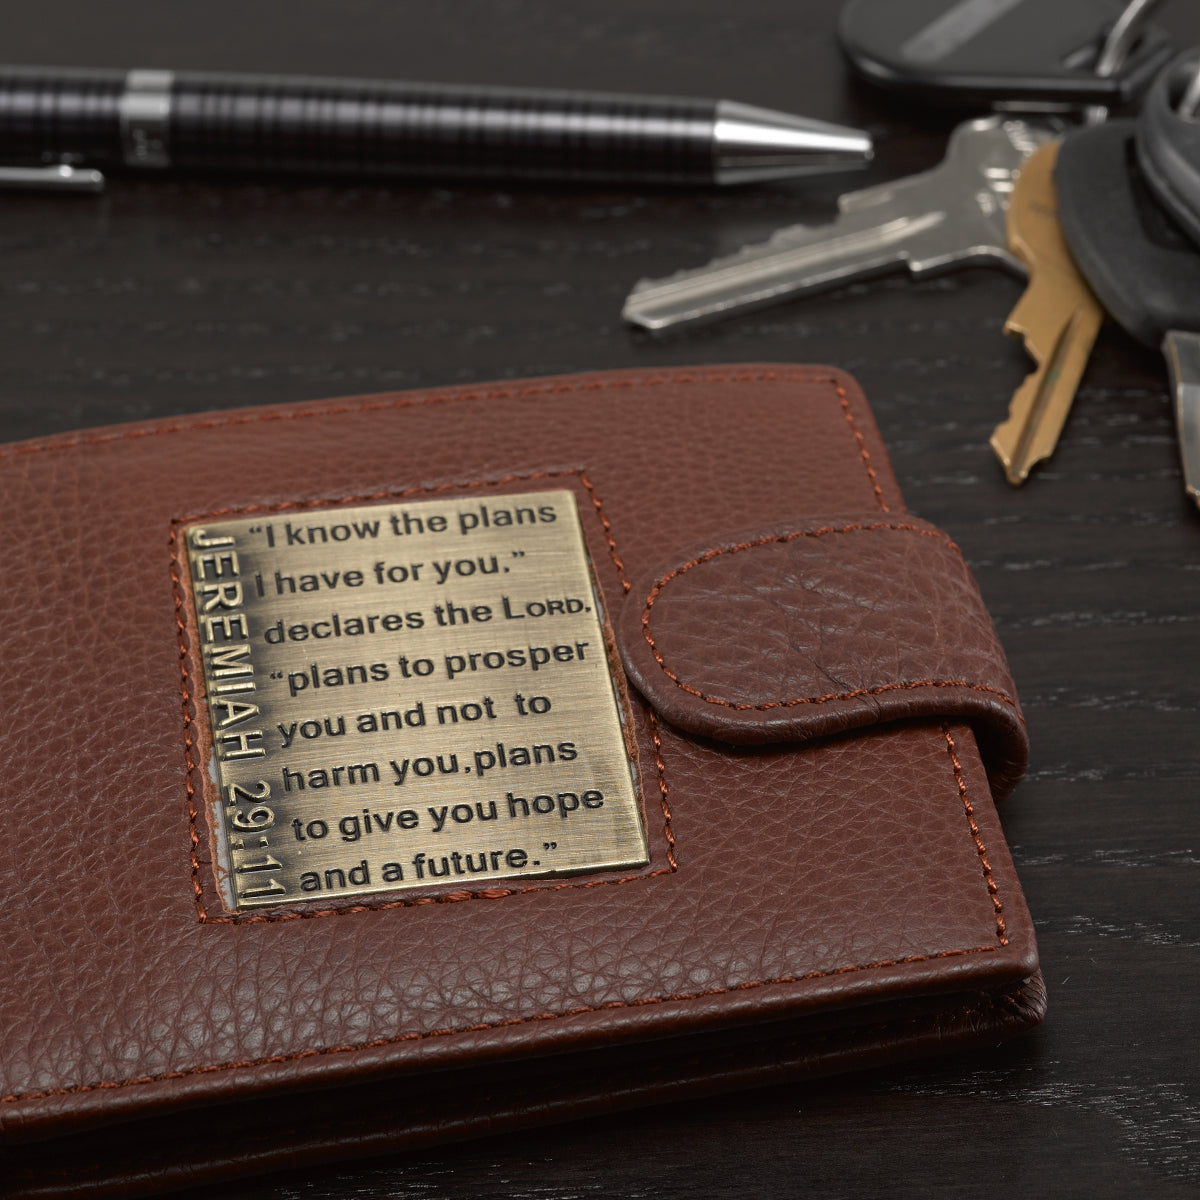 I Know the Plans Timber Spice Brown Genuine Leather Wallet with Brass Inlay - Jeremiah 29:11 - The Christian Gift Company